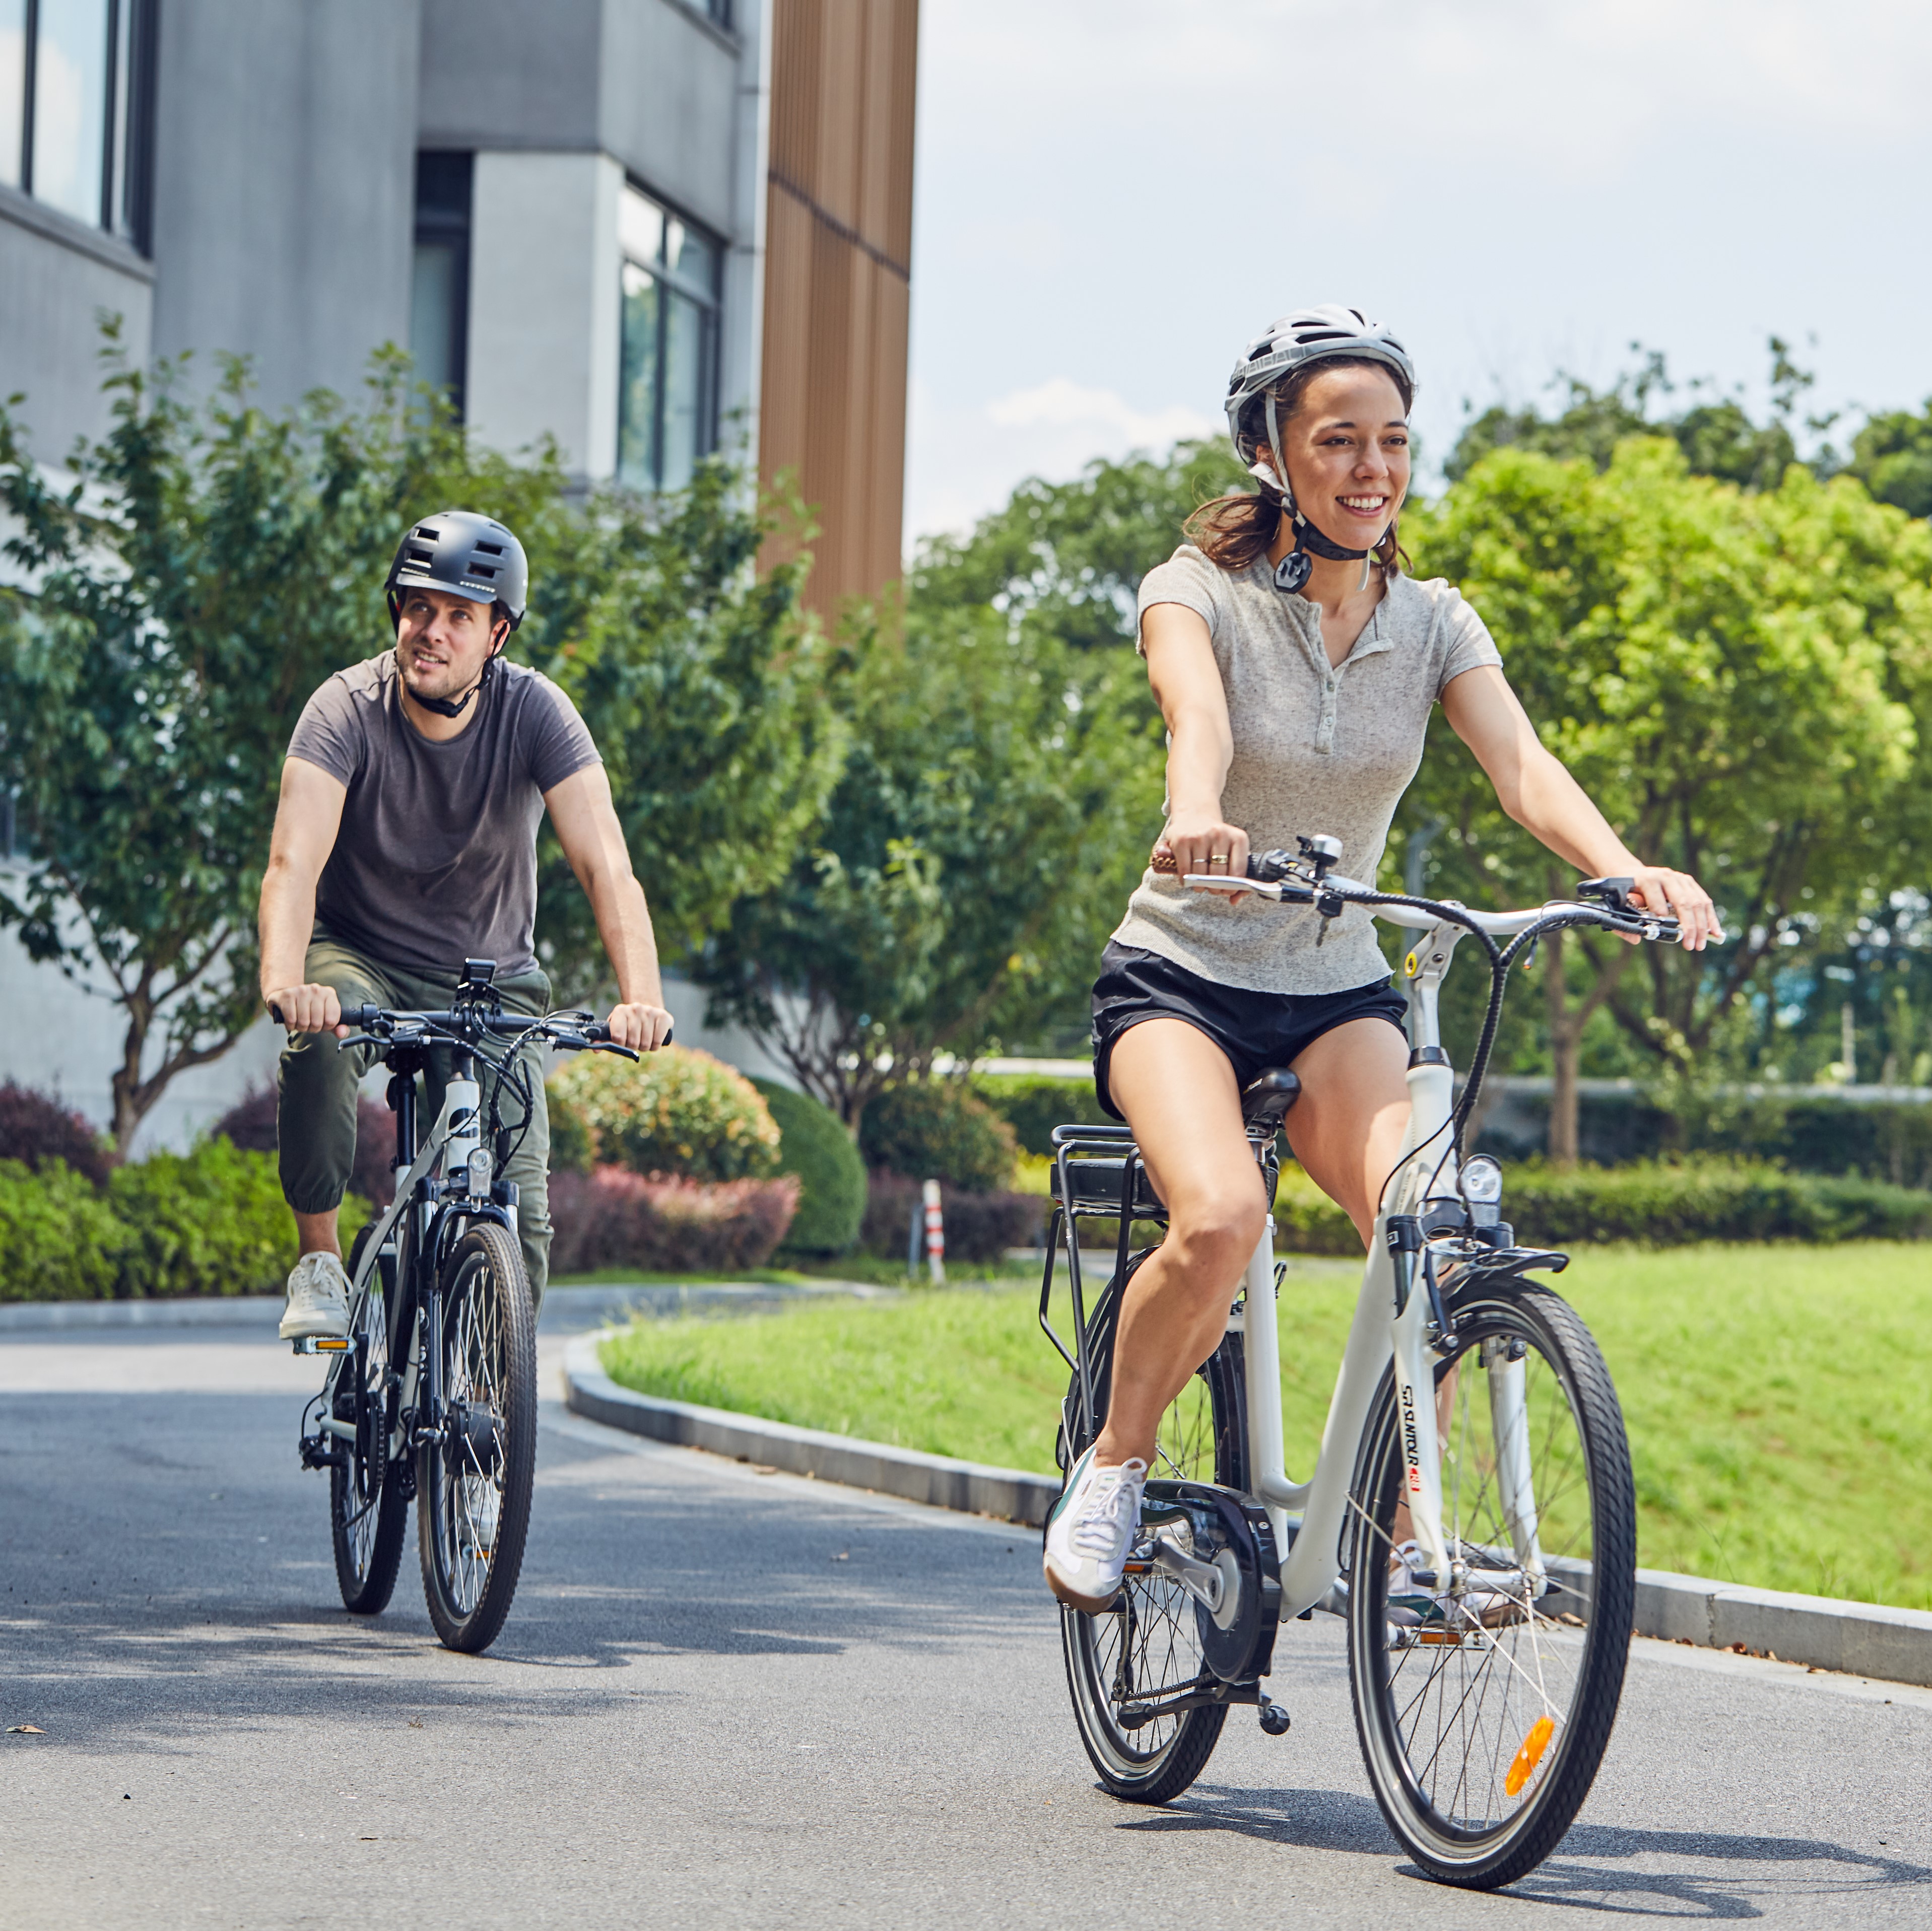 The benefits of electric bicycles